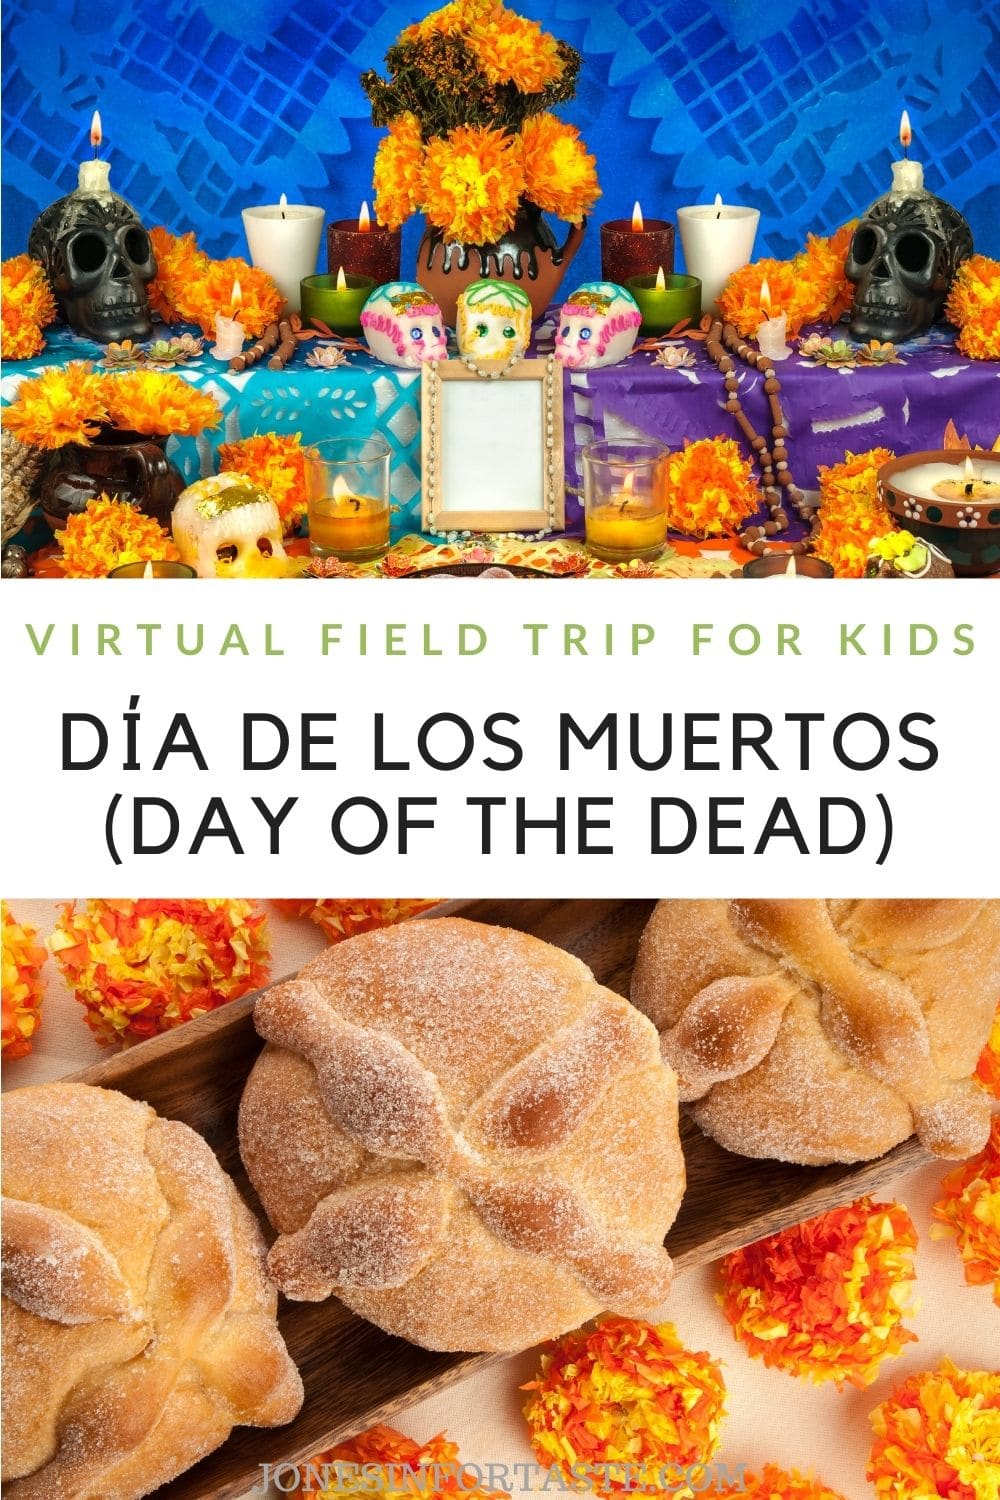 Day of the Dead Virtual Field Trip For Kids